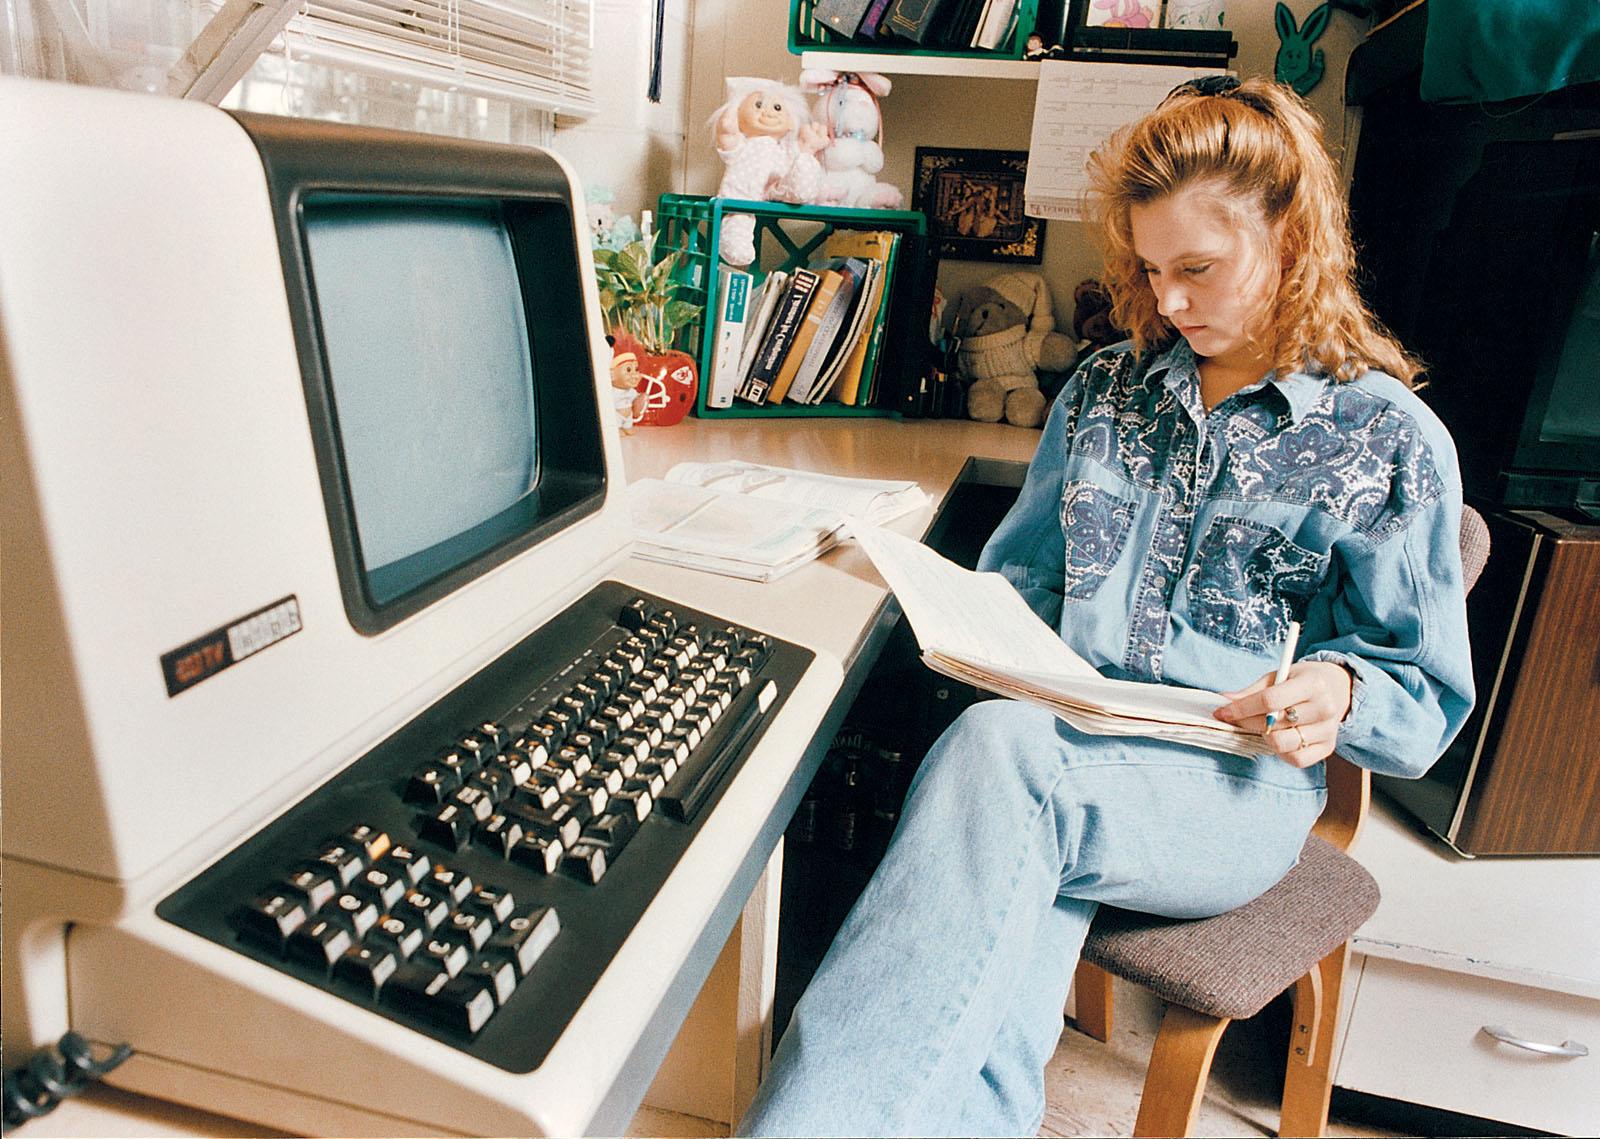 Beginning in 1987, every Northwest residence hall room was equipped with a computer terminal networked to a common server that provided access to an online library catalog, word processing and email.